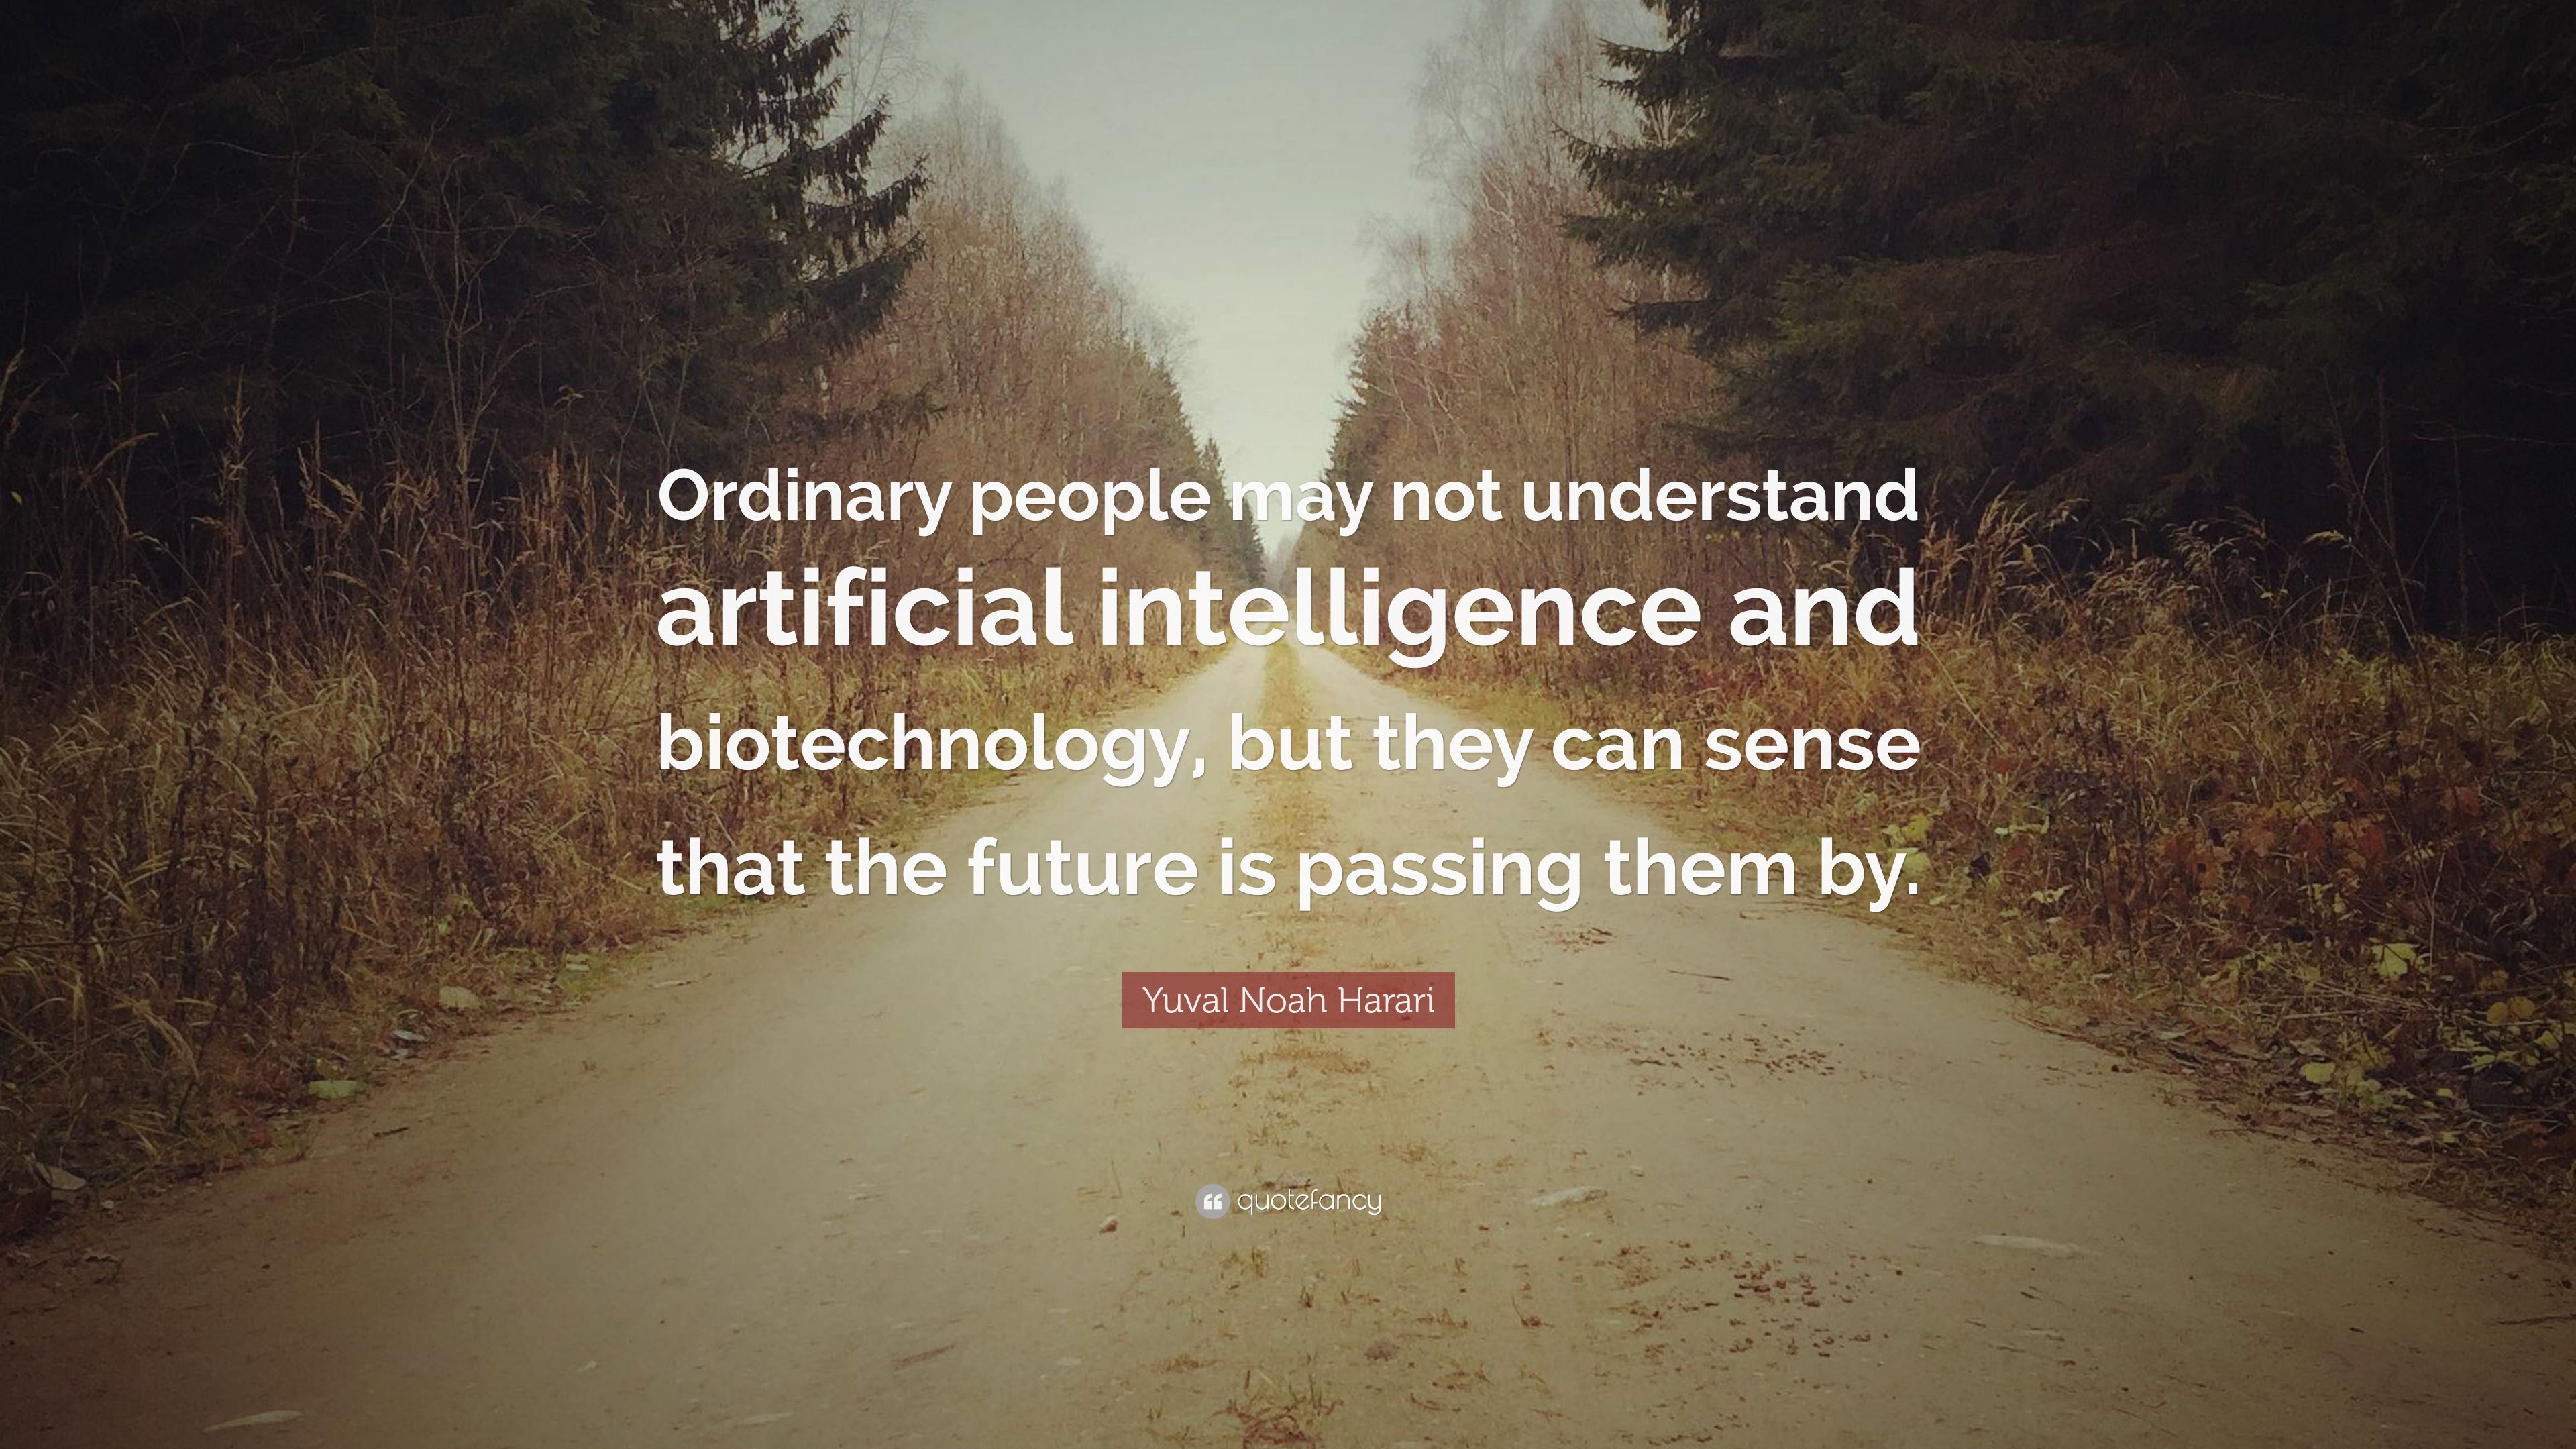 Yuval Noah Harari Quote: “Ordinary people may not understand artificial ...